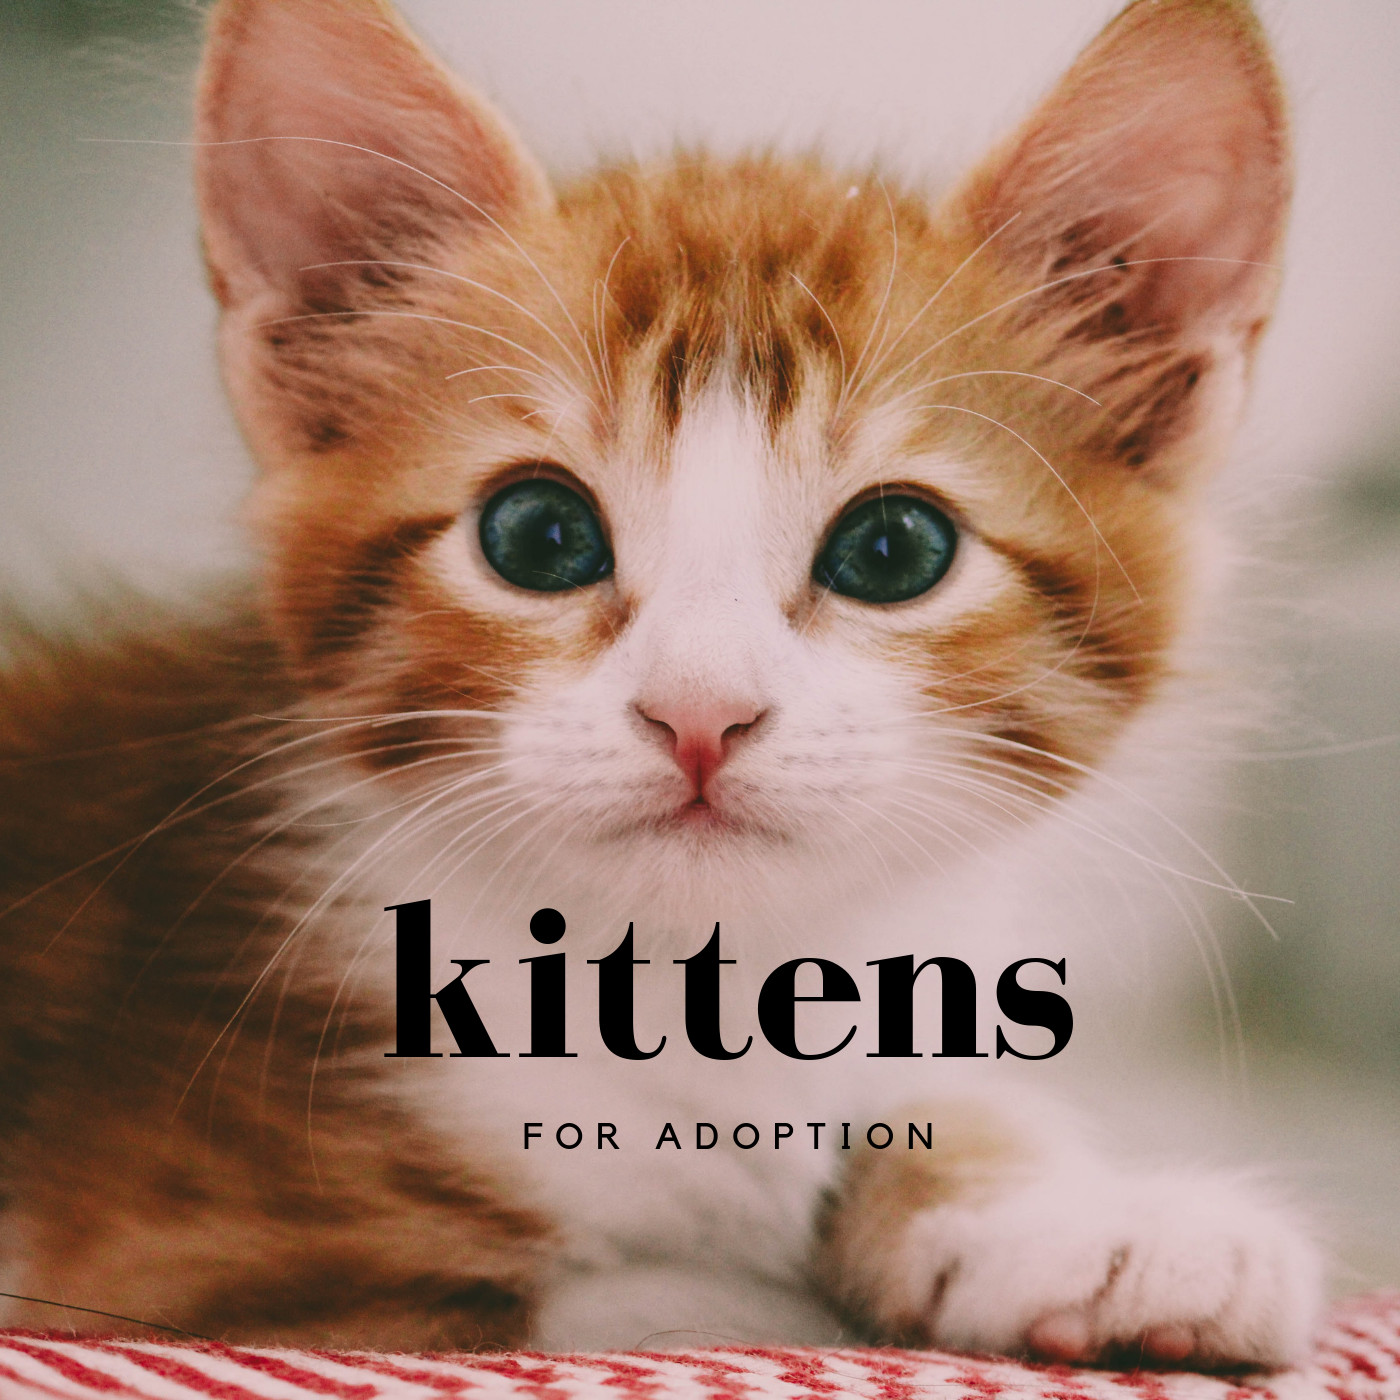 about kittens